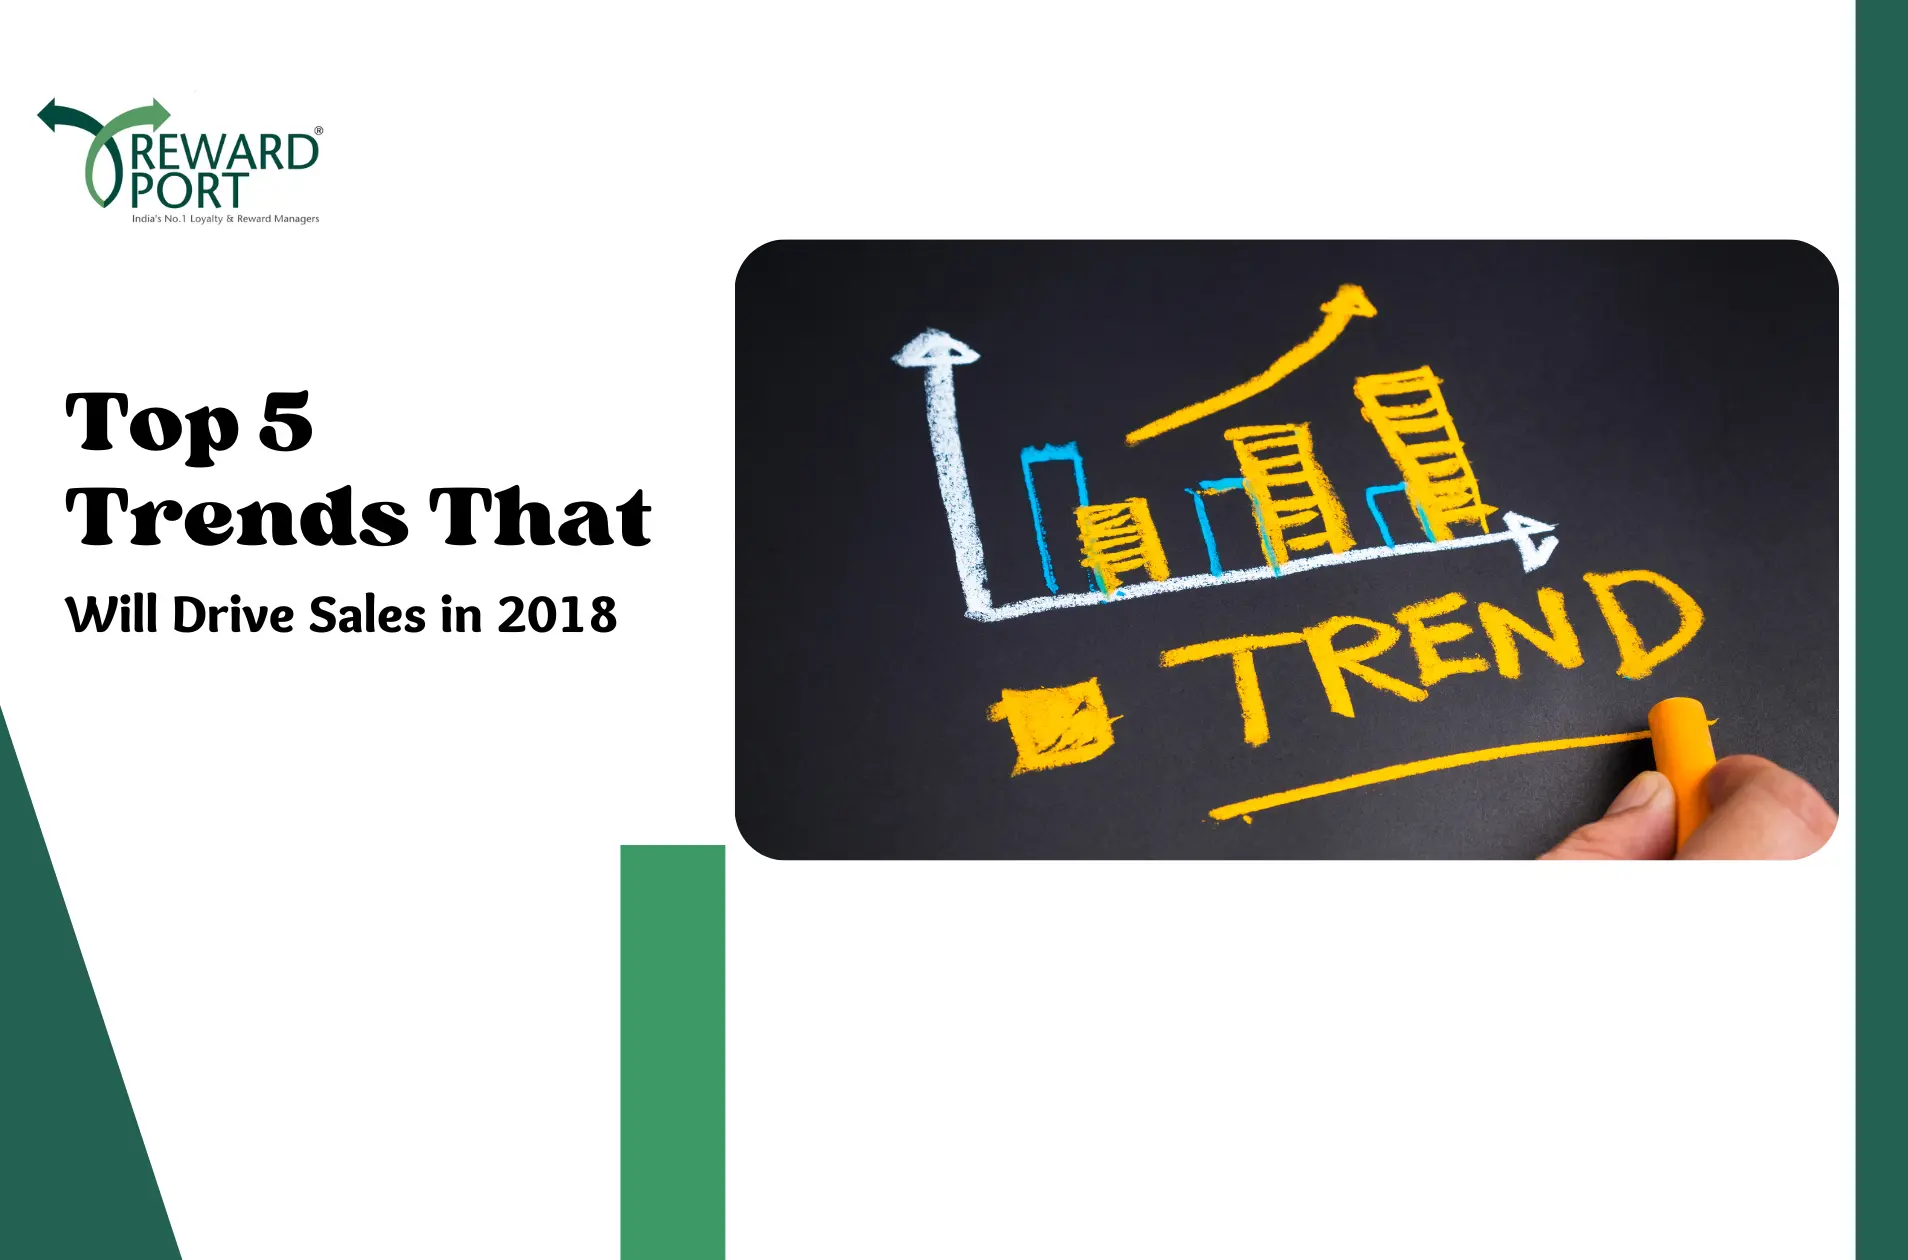 Top 5 Trends That Will Drive Sales in 2018